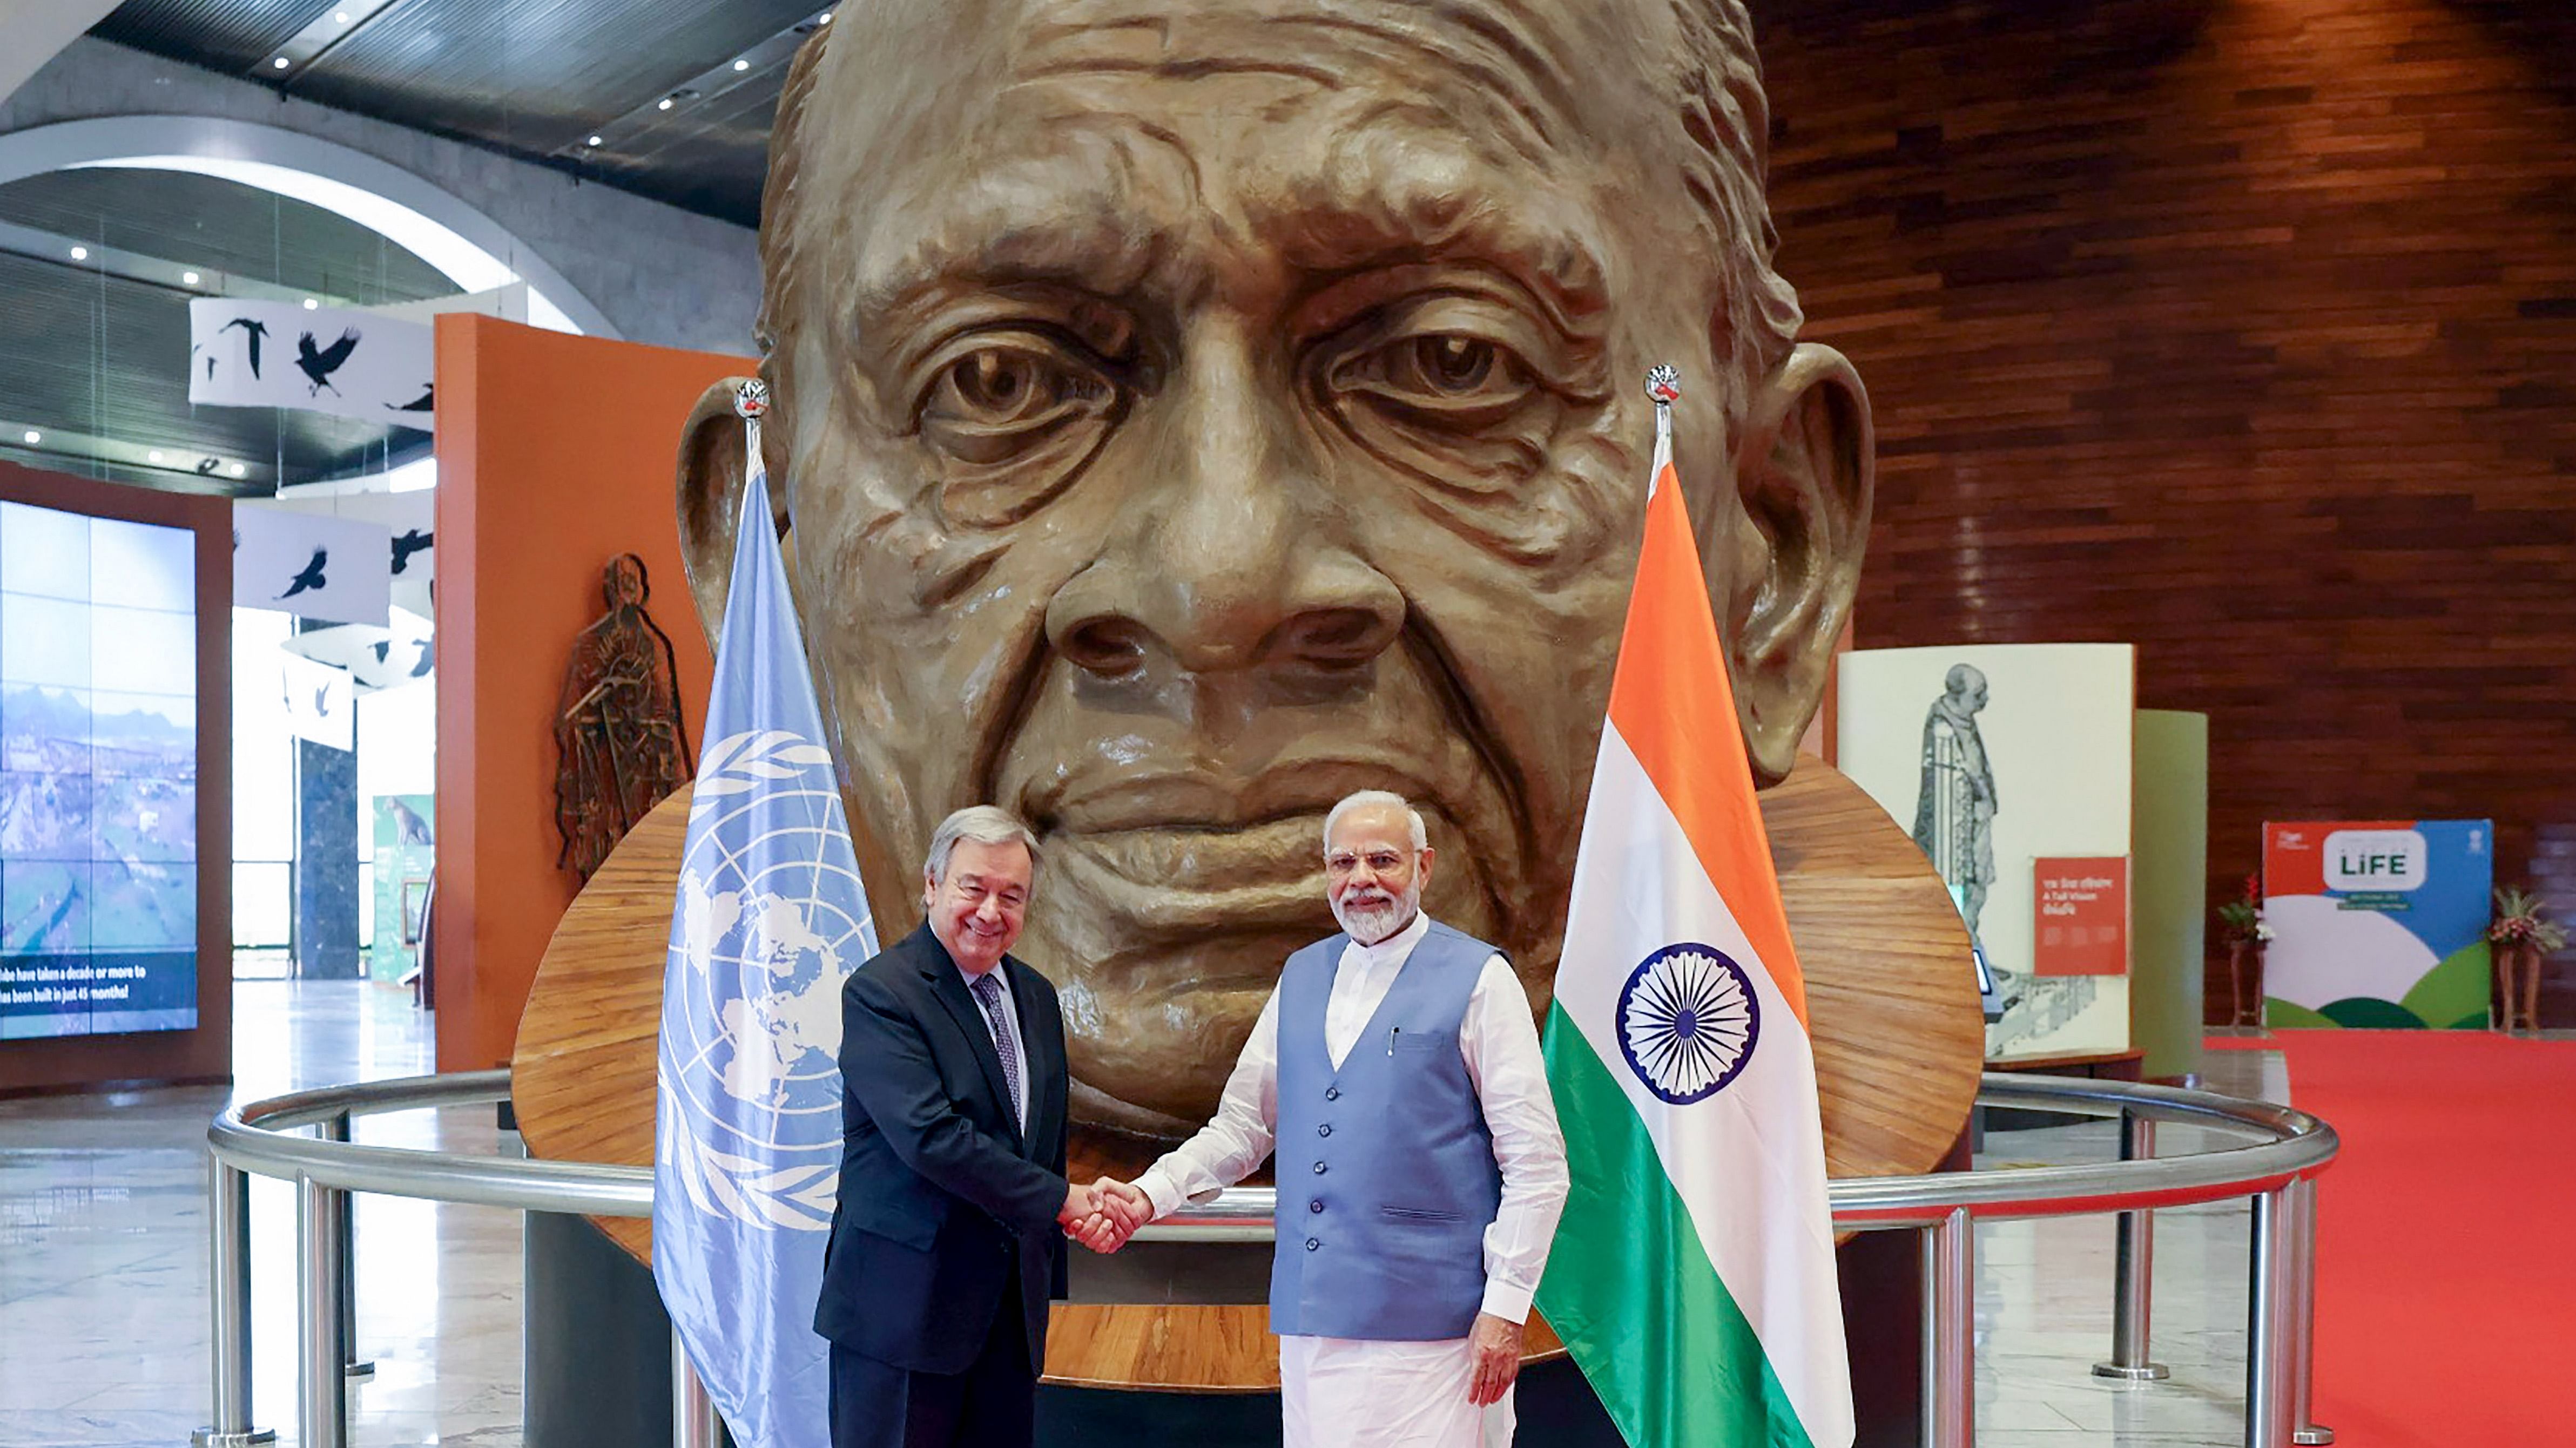 Prime Minister Narendra Modi with United Nations Secretary-General Antonio Guterres during the global launch of Mission LiFE, in Kevadia. Credit: PTI Photo